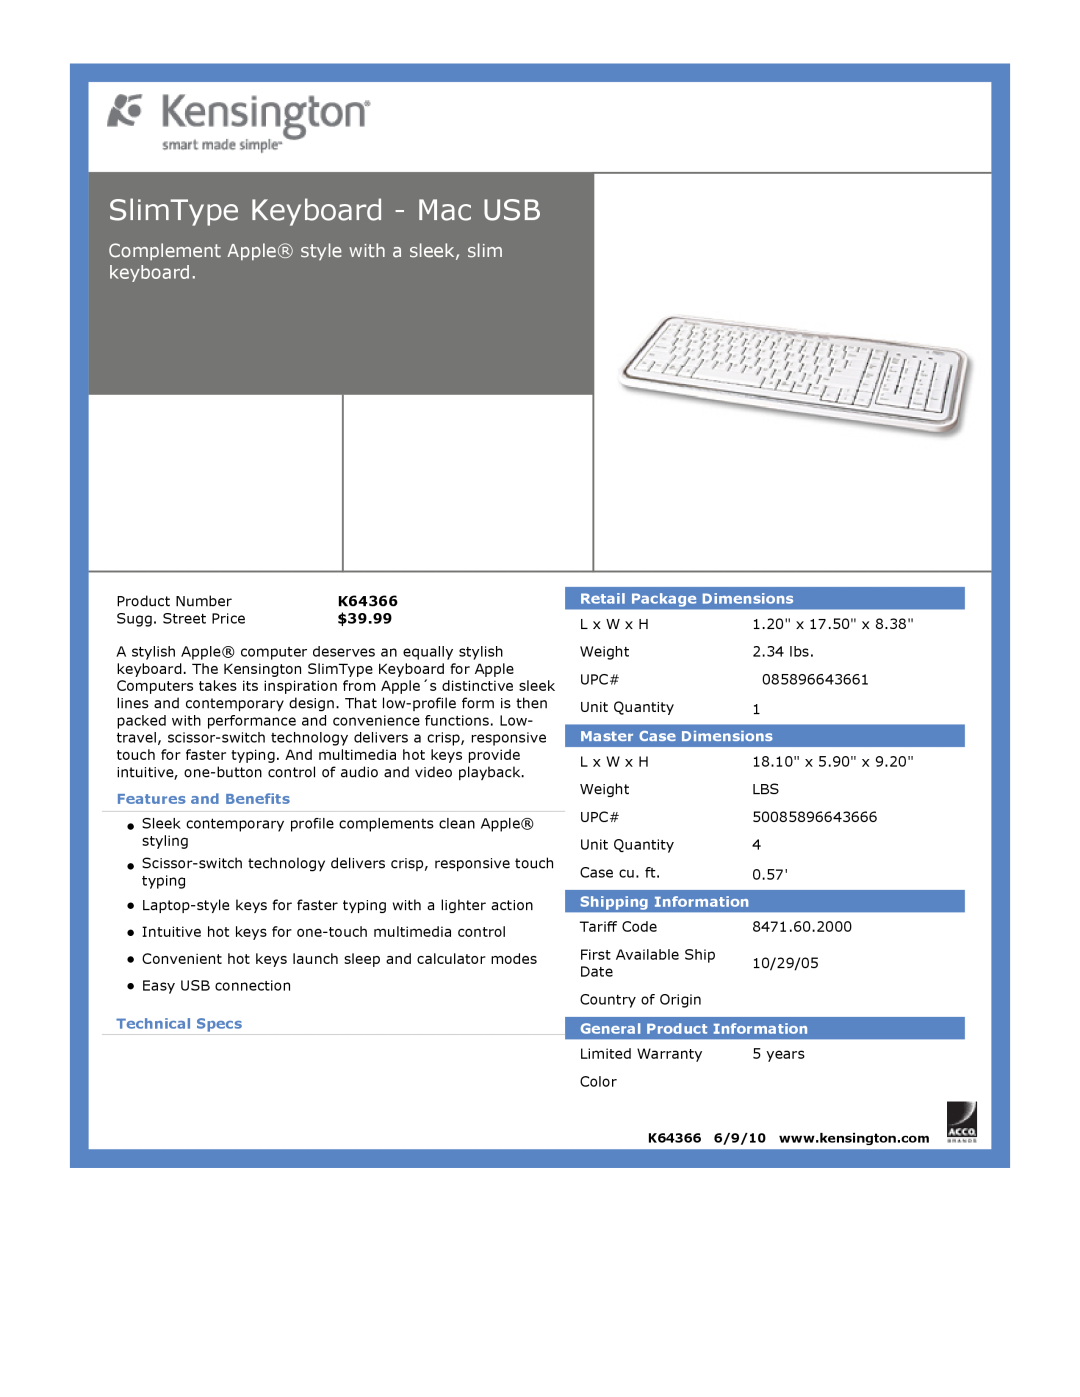 Kensington EU64325 SlimType Keyboard - Mac USB, $39.99, Features and Benefits, Technical Specs, Retail Package Dimensions 